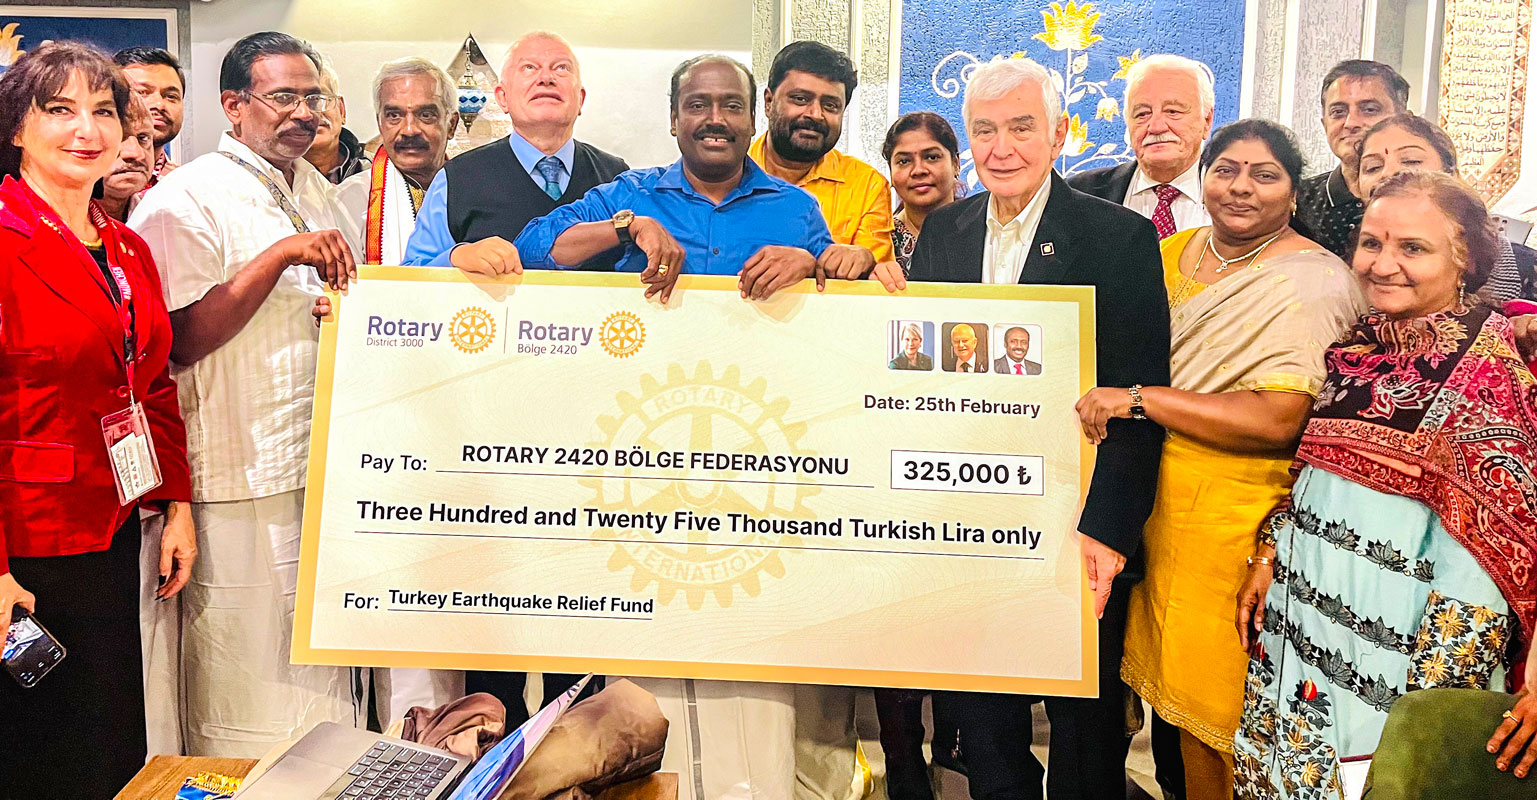 DG I Jerald hands over cheque for 325,000 Turkish lira to RID 2420 DG Suat (on his right) and PRID Safak Alpay (third from R). Also seen: RC Istanbul Anatolia president Ayse (L), Venkatesh (on DG Jerald’s left), Goodwill Mission chairman Chithra Ramesh, PDG Kara and Margaret Jerald. 